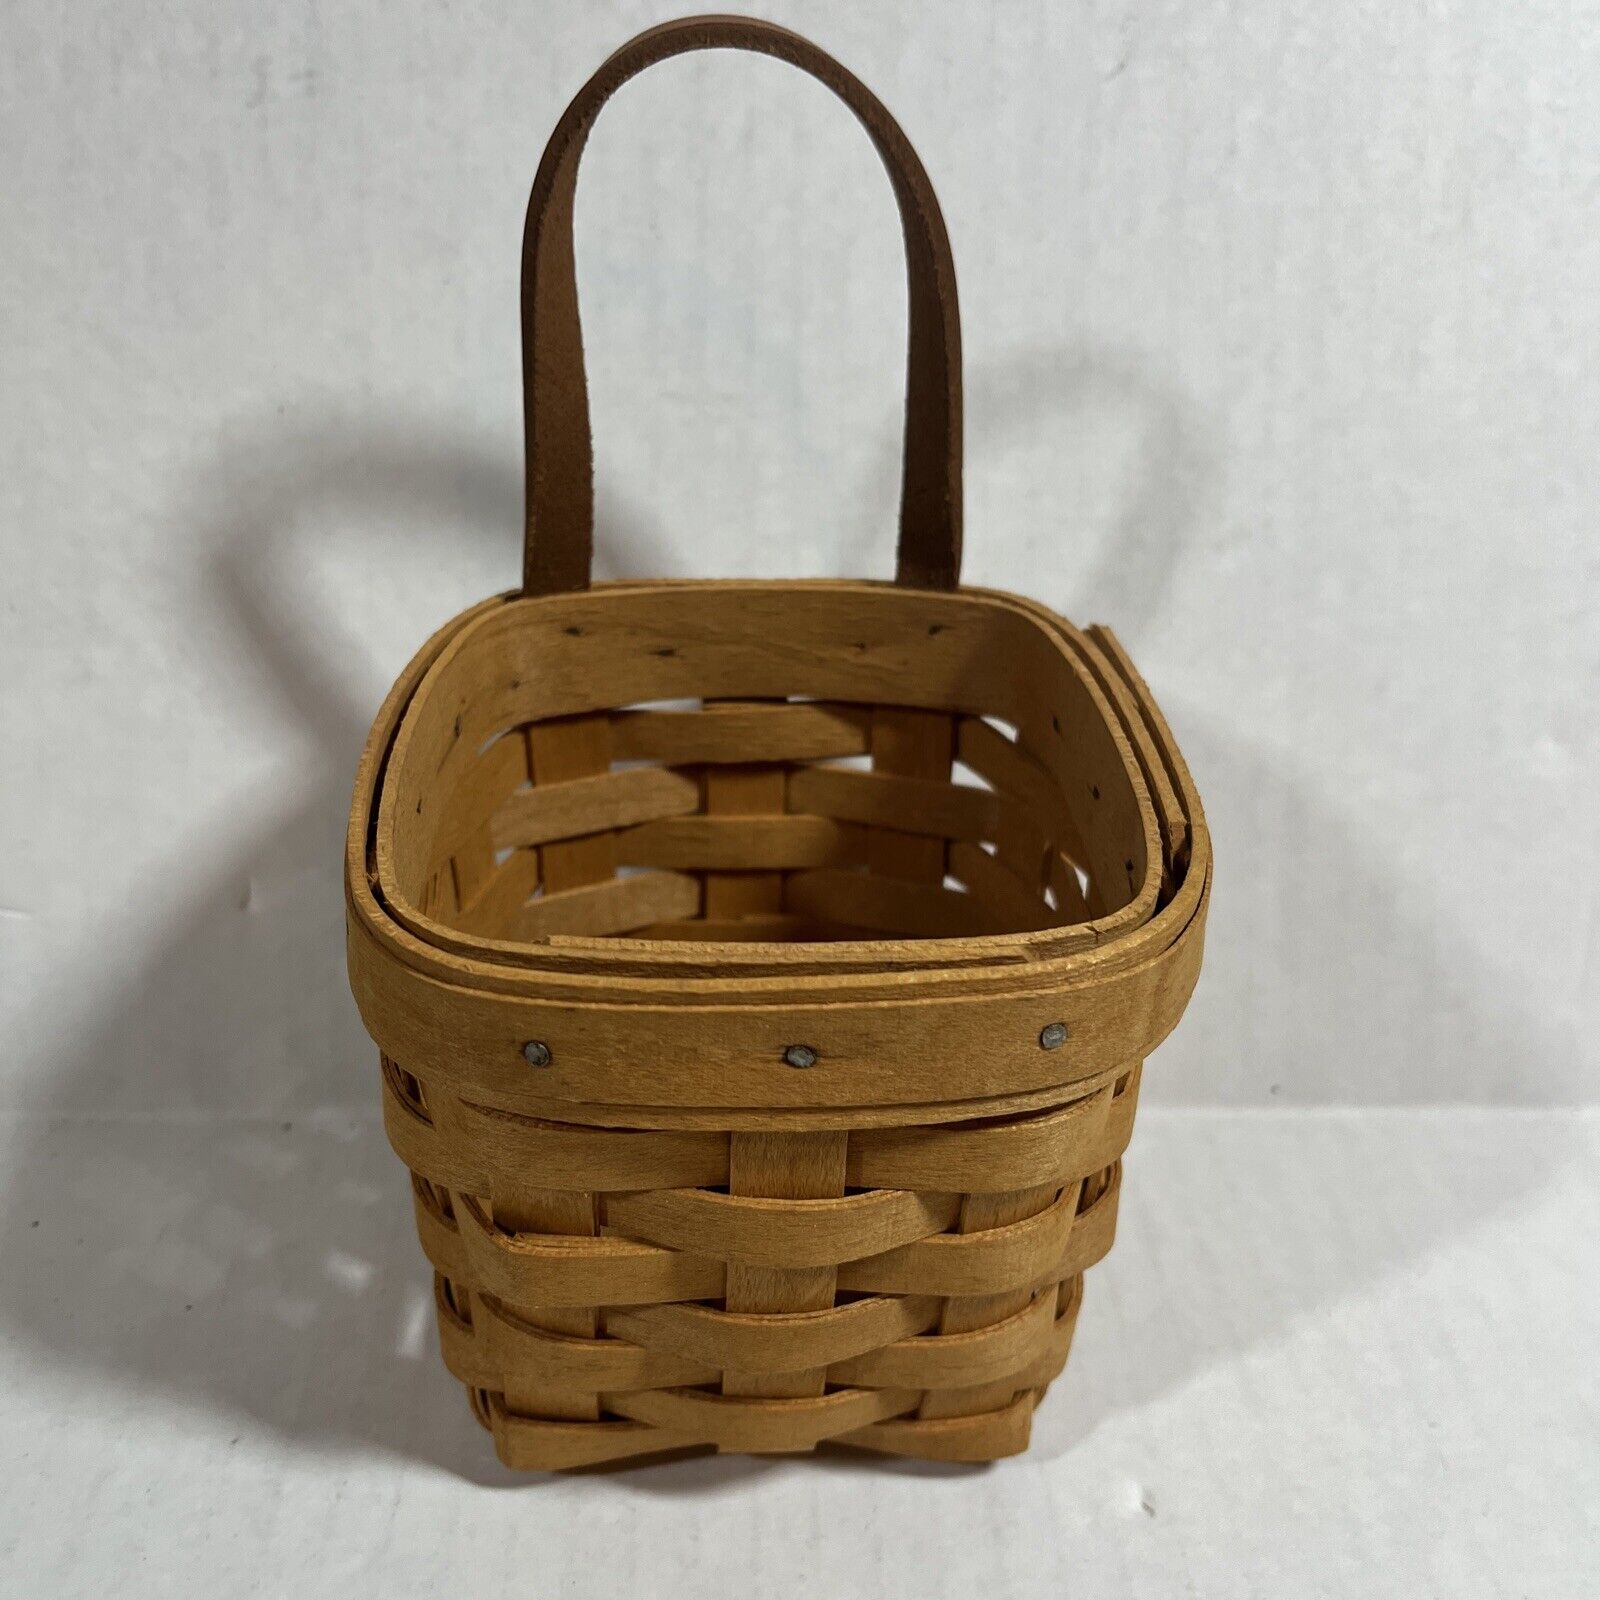 Longaberger Chives Basket - DC 1996 - IL  - 4 by 4 by 4 - Hanger